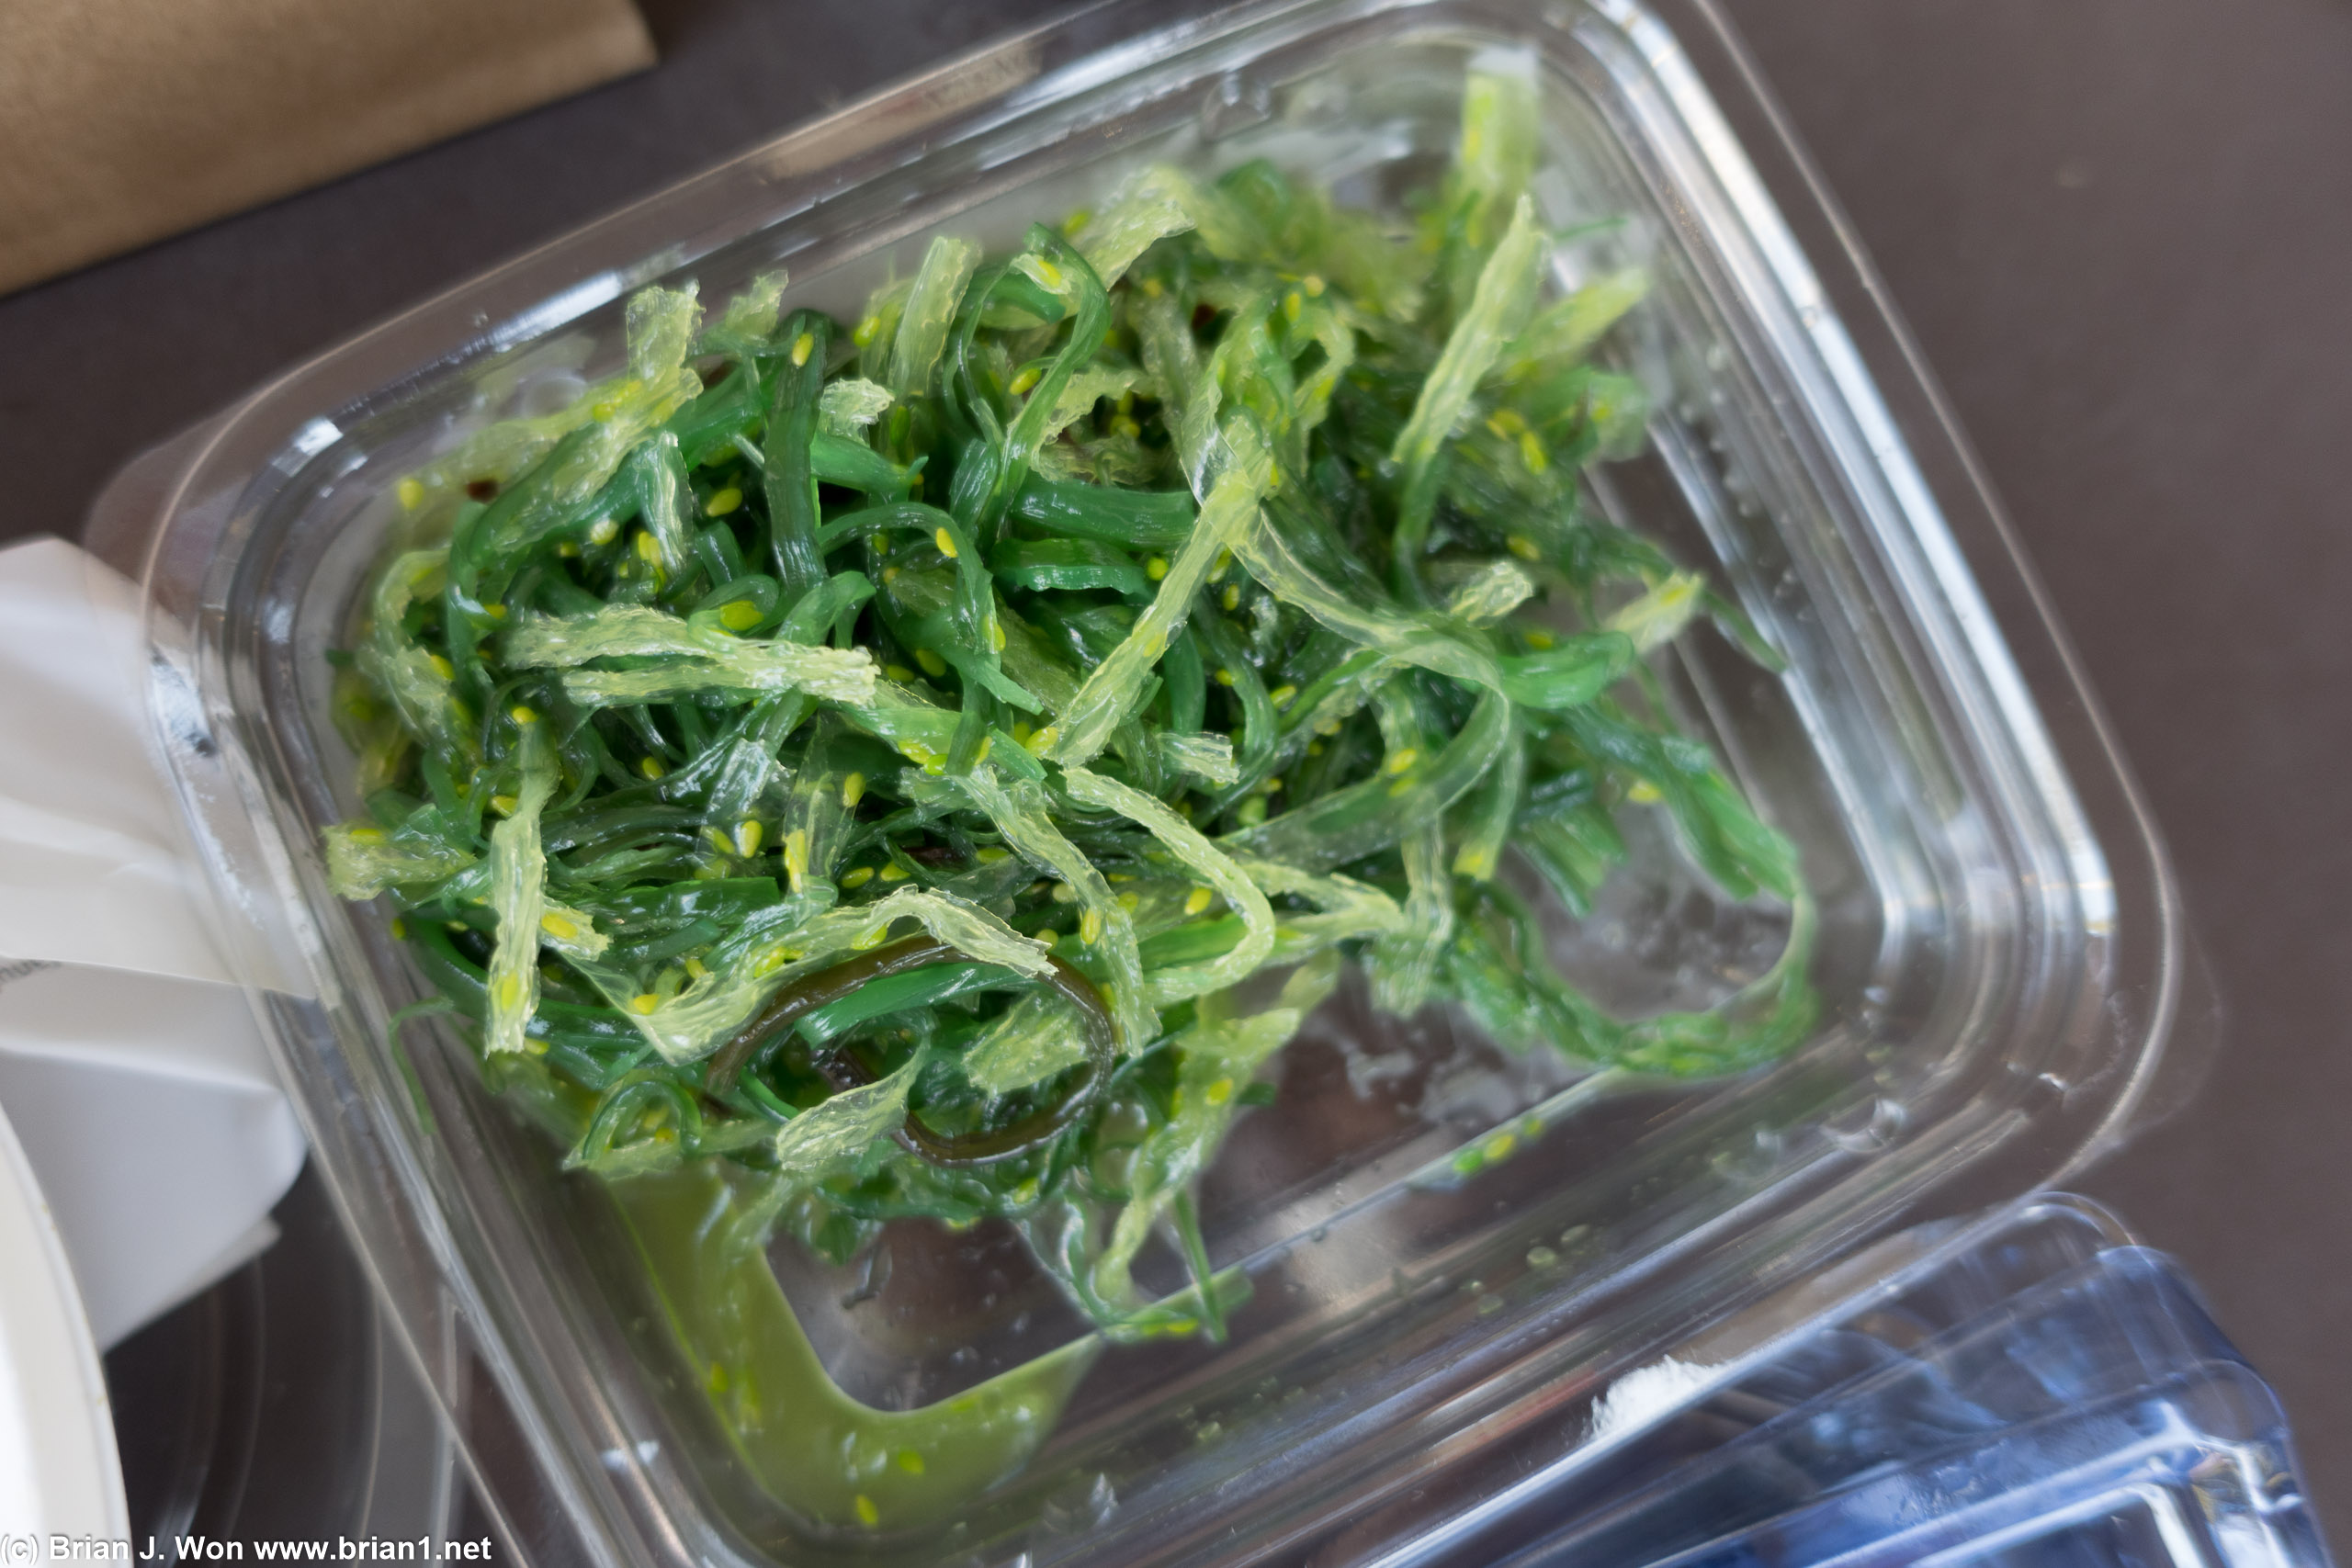 Seaweed salad was at least not overly sweet, so not too awful.